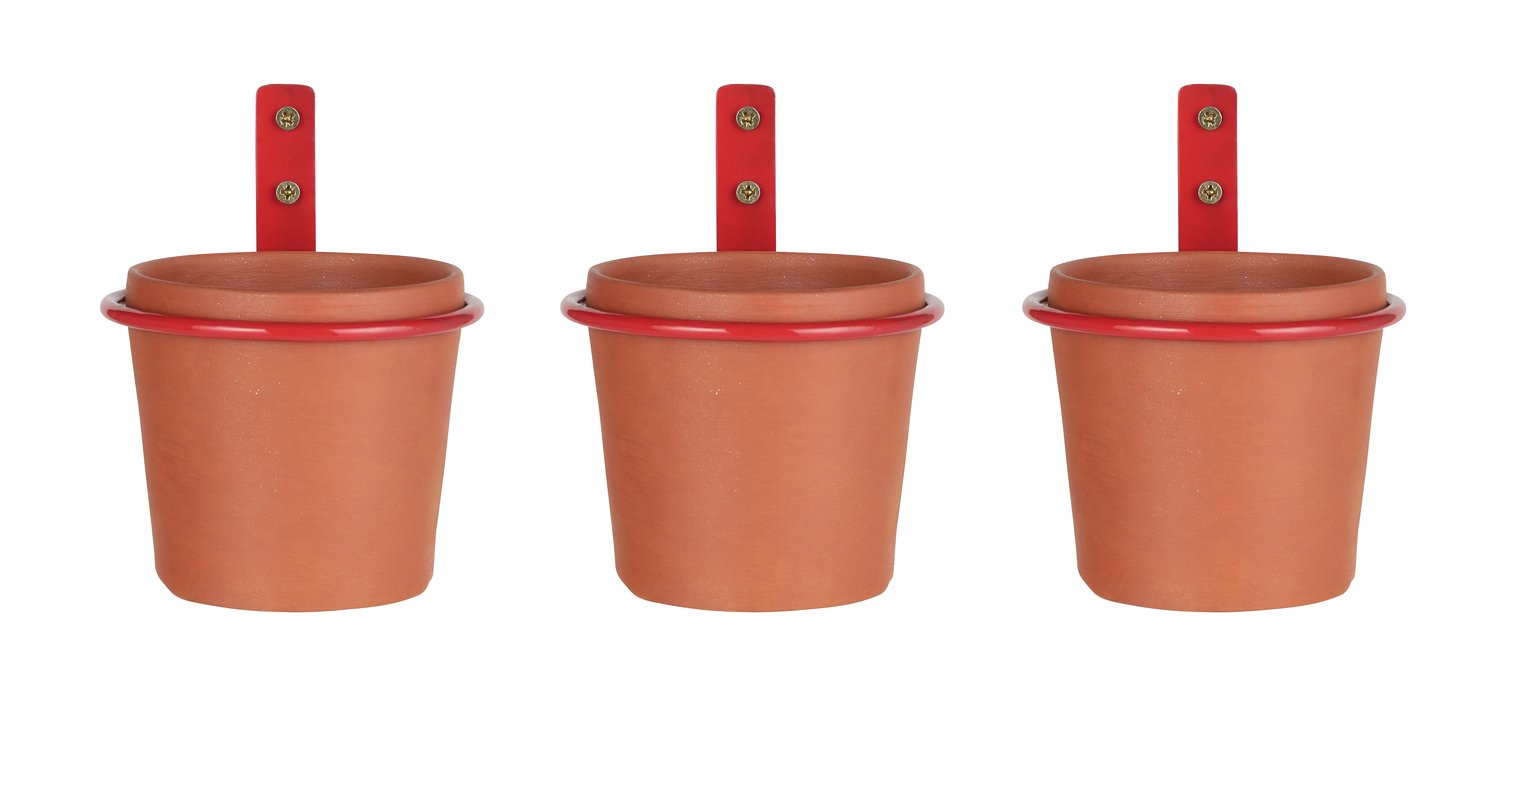 Garden by Sainsbury's Wall Pot Planter with Bracket-Set of 3